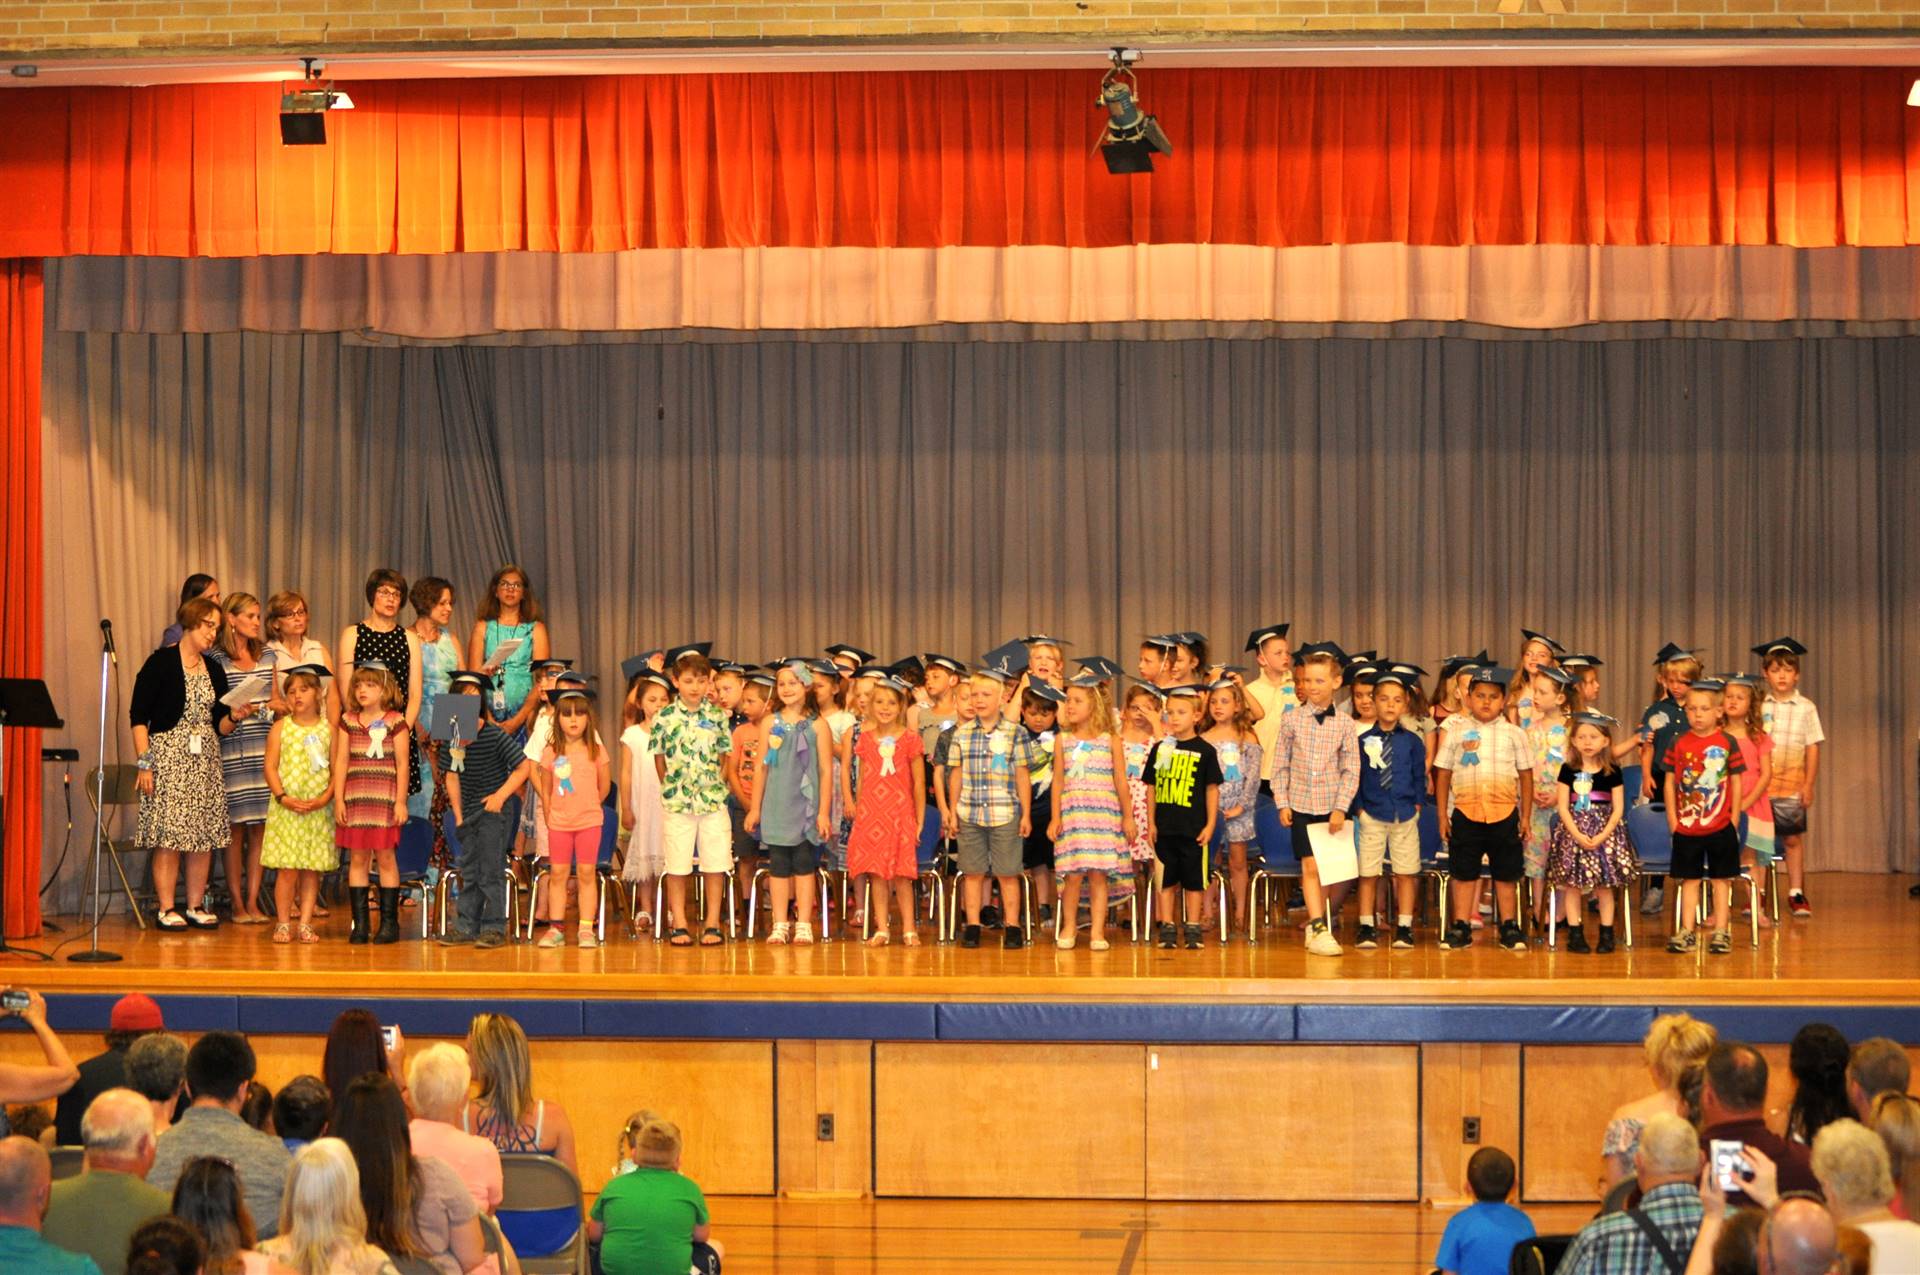 Students and staff of the first grade graduating class on stage!